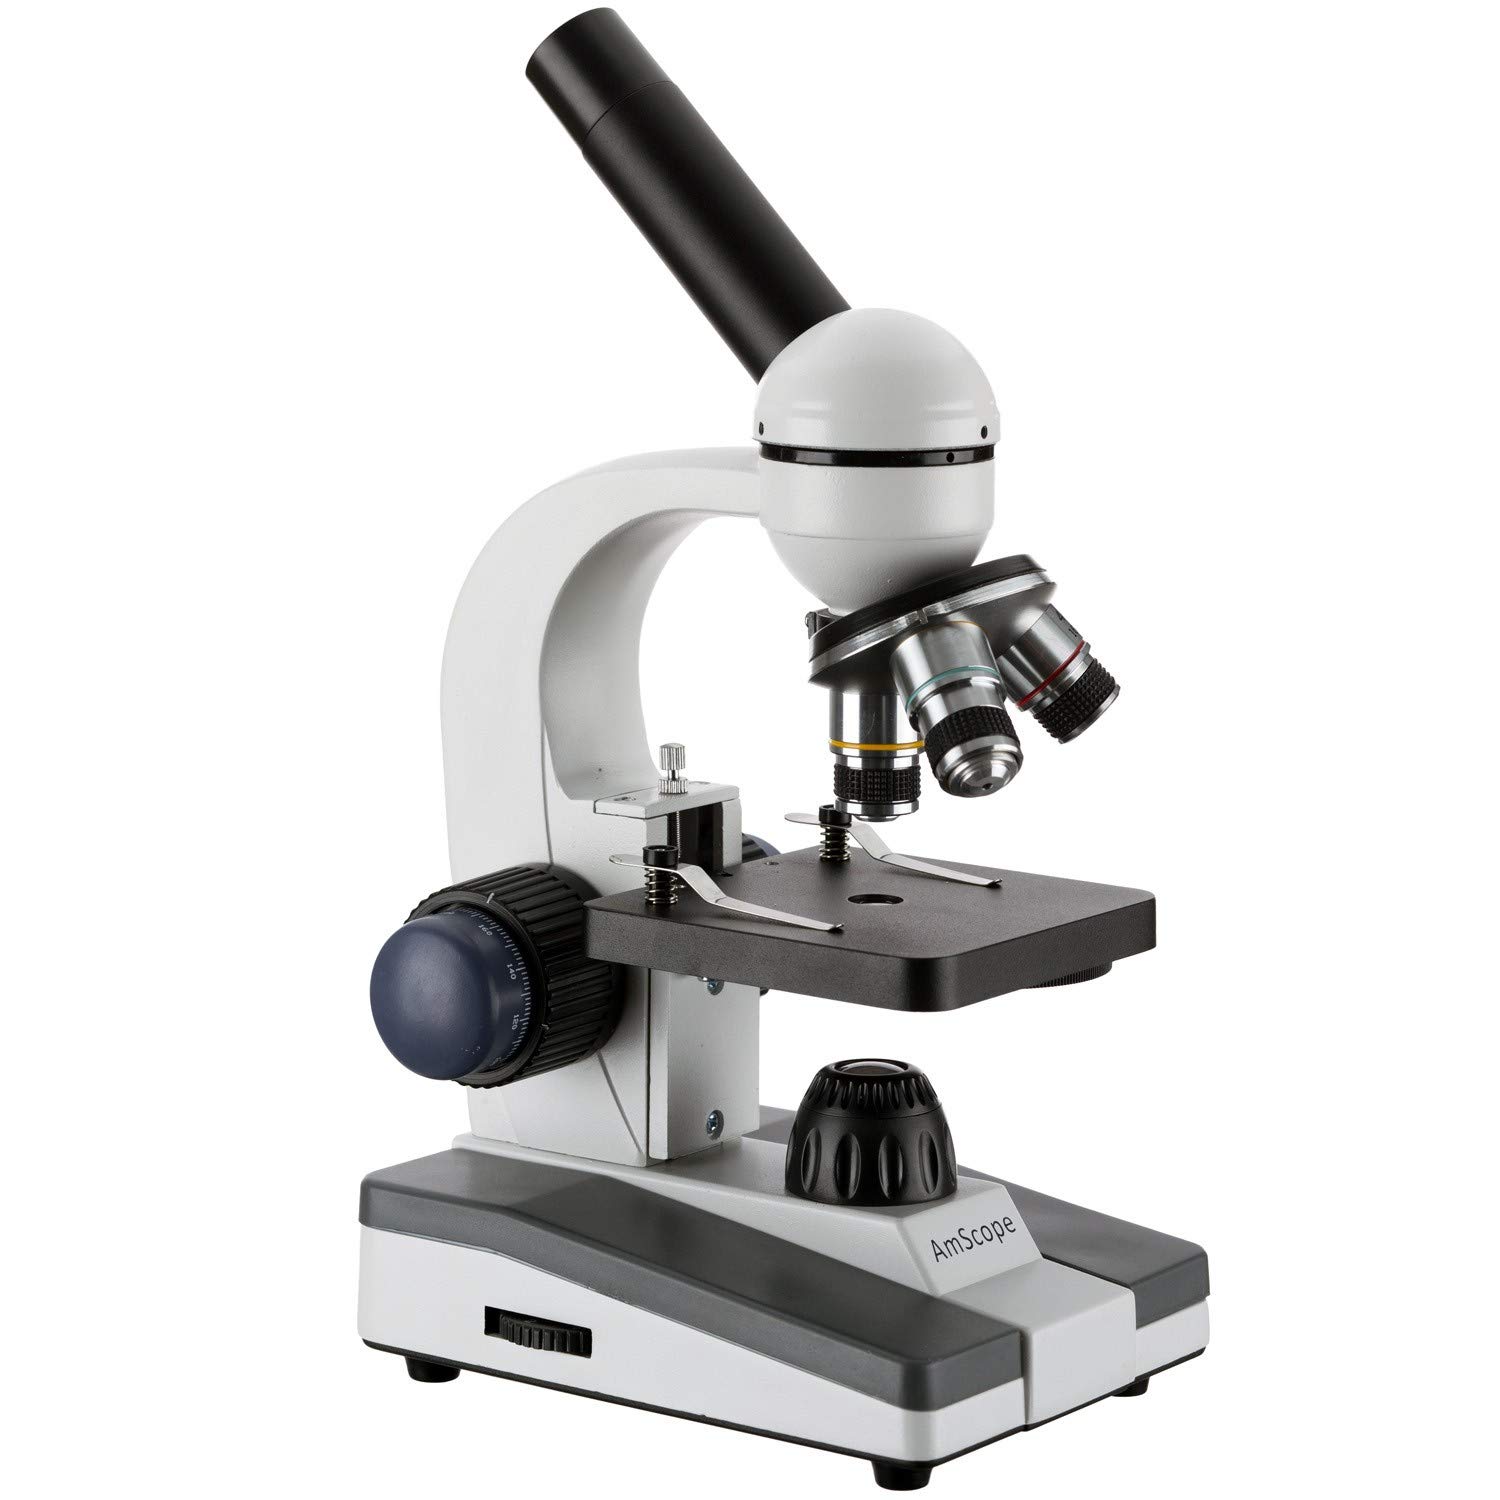 Top 10 Best Microscope for Kids Reviews in 2022 7